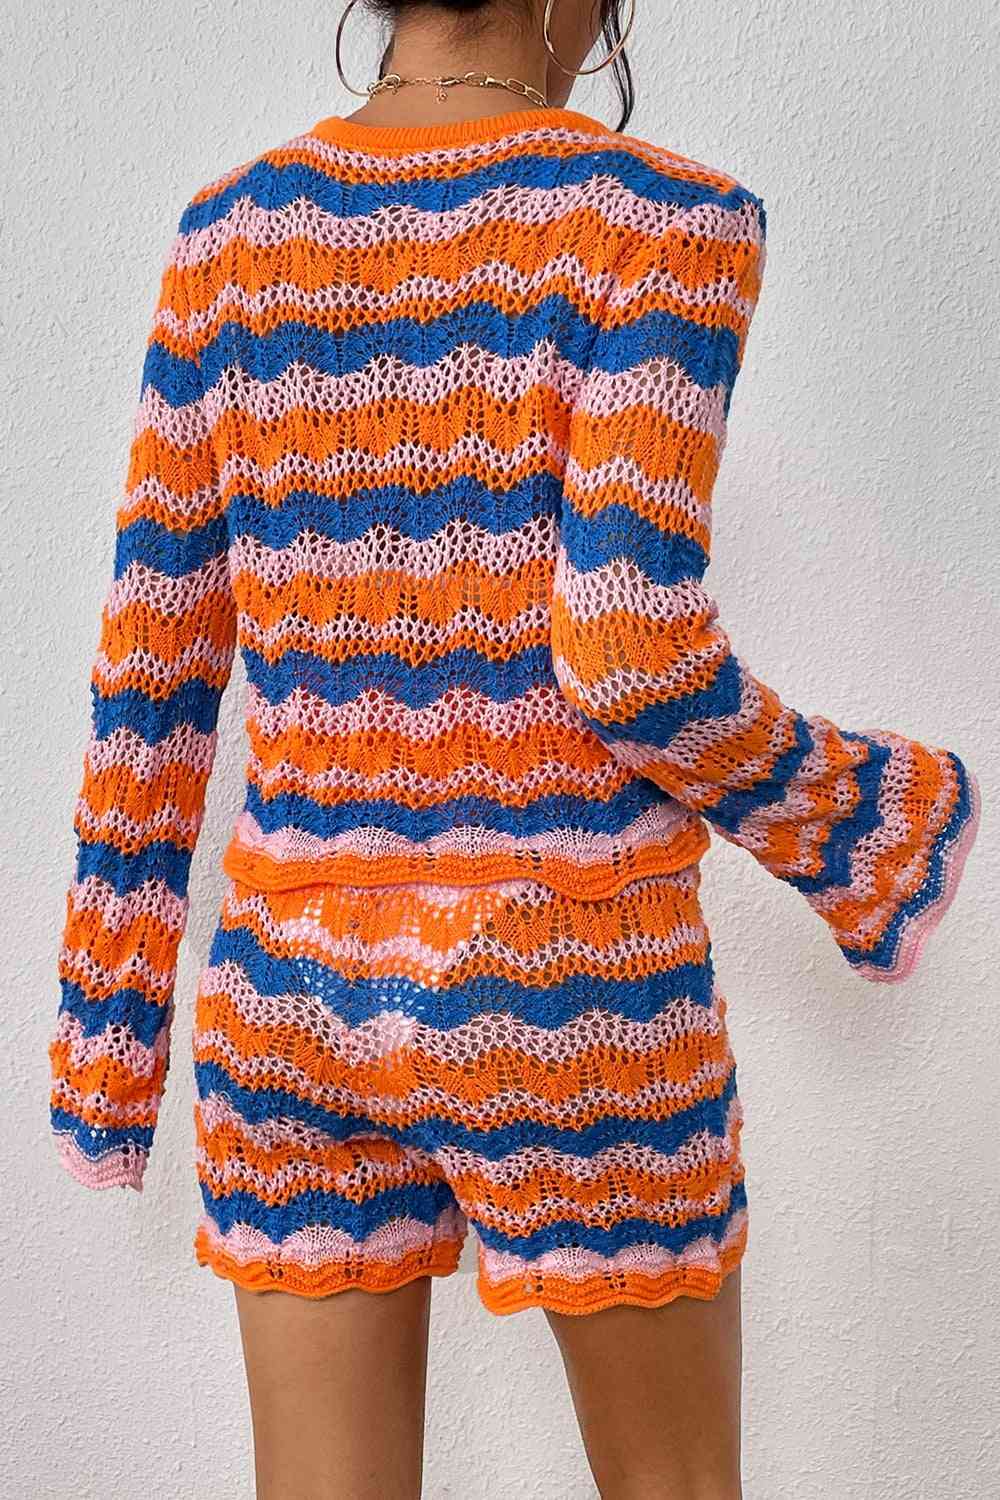 Women's Striped Sweater and Knit Shorts Set